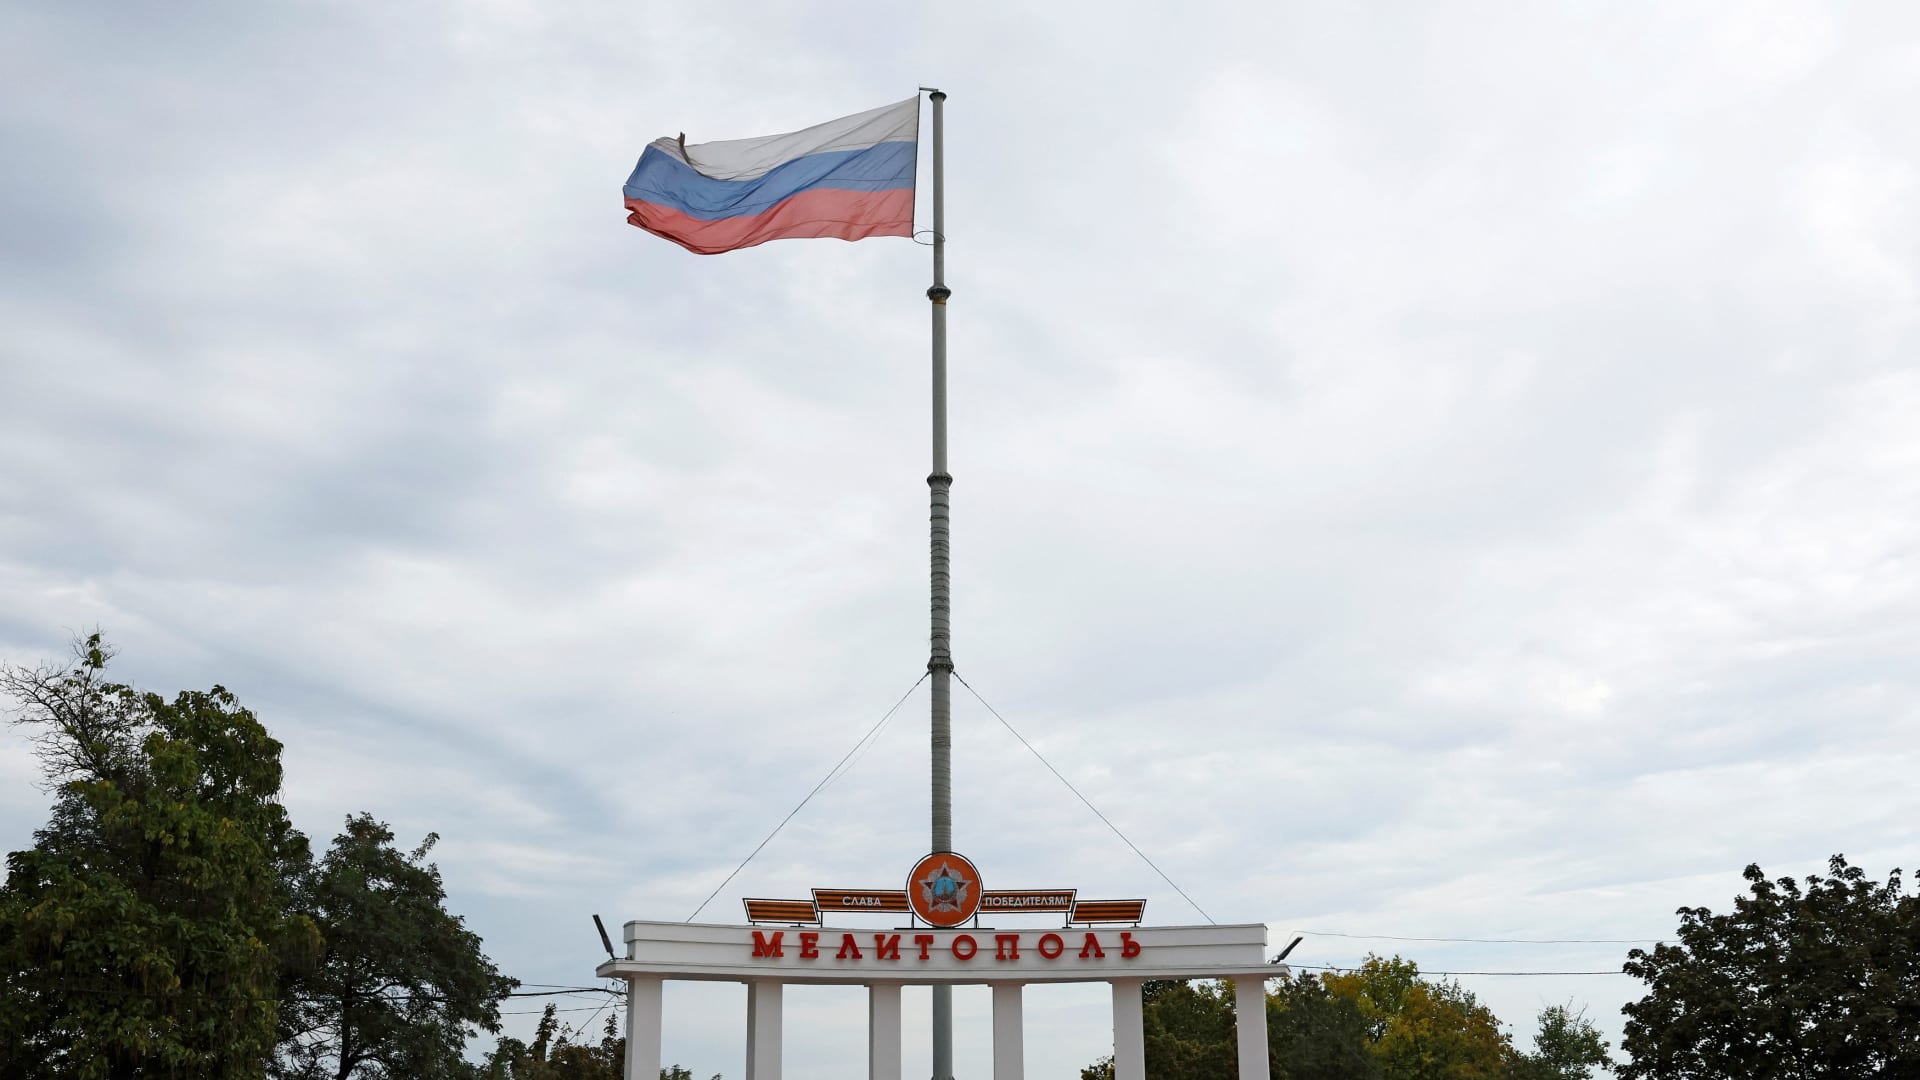 A view shows the Russian flag flying in the square during a five-day referendum on the secession of Zaporizhzhia region from Ukraine and its joining Russia, in the Russian-controlled city of Melitopol in the Zaporizhzhia region, Ukraine September 26, 2022.